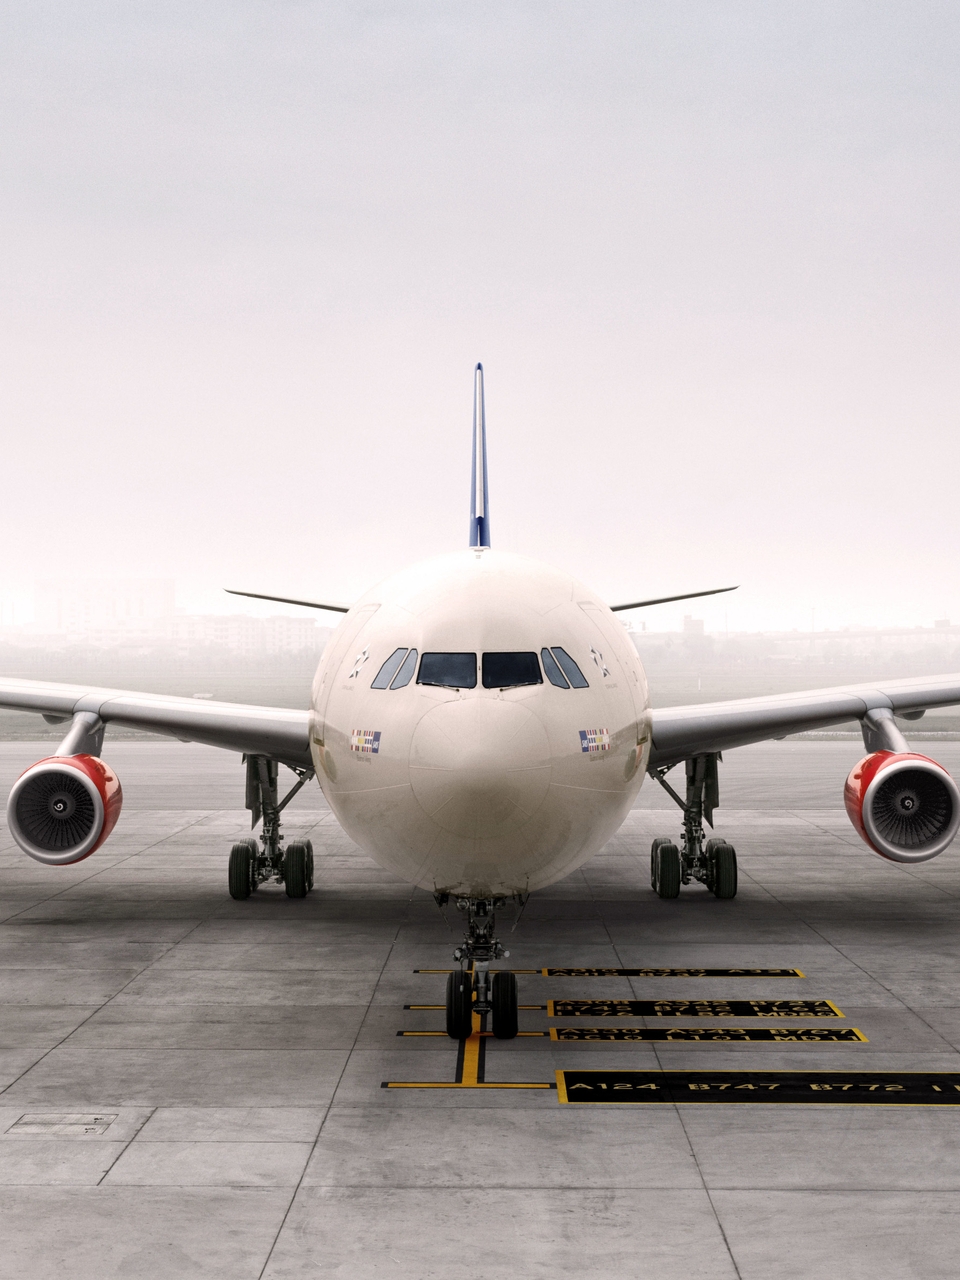 Image: Plane, Airbus, A340, passenger, wings, engines, playground, airport, fog